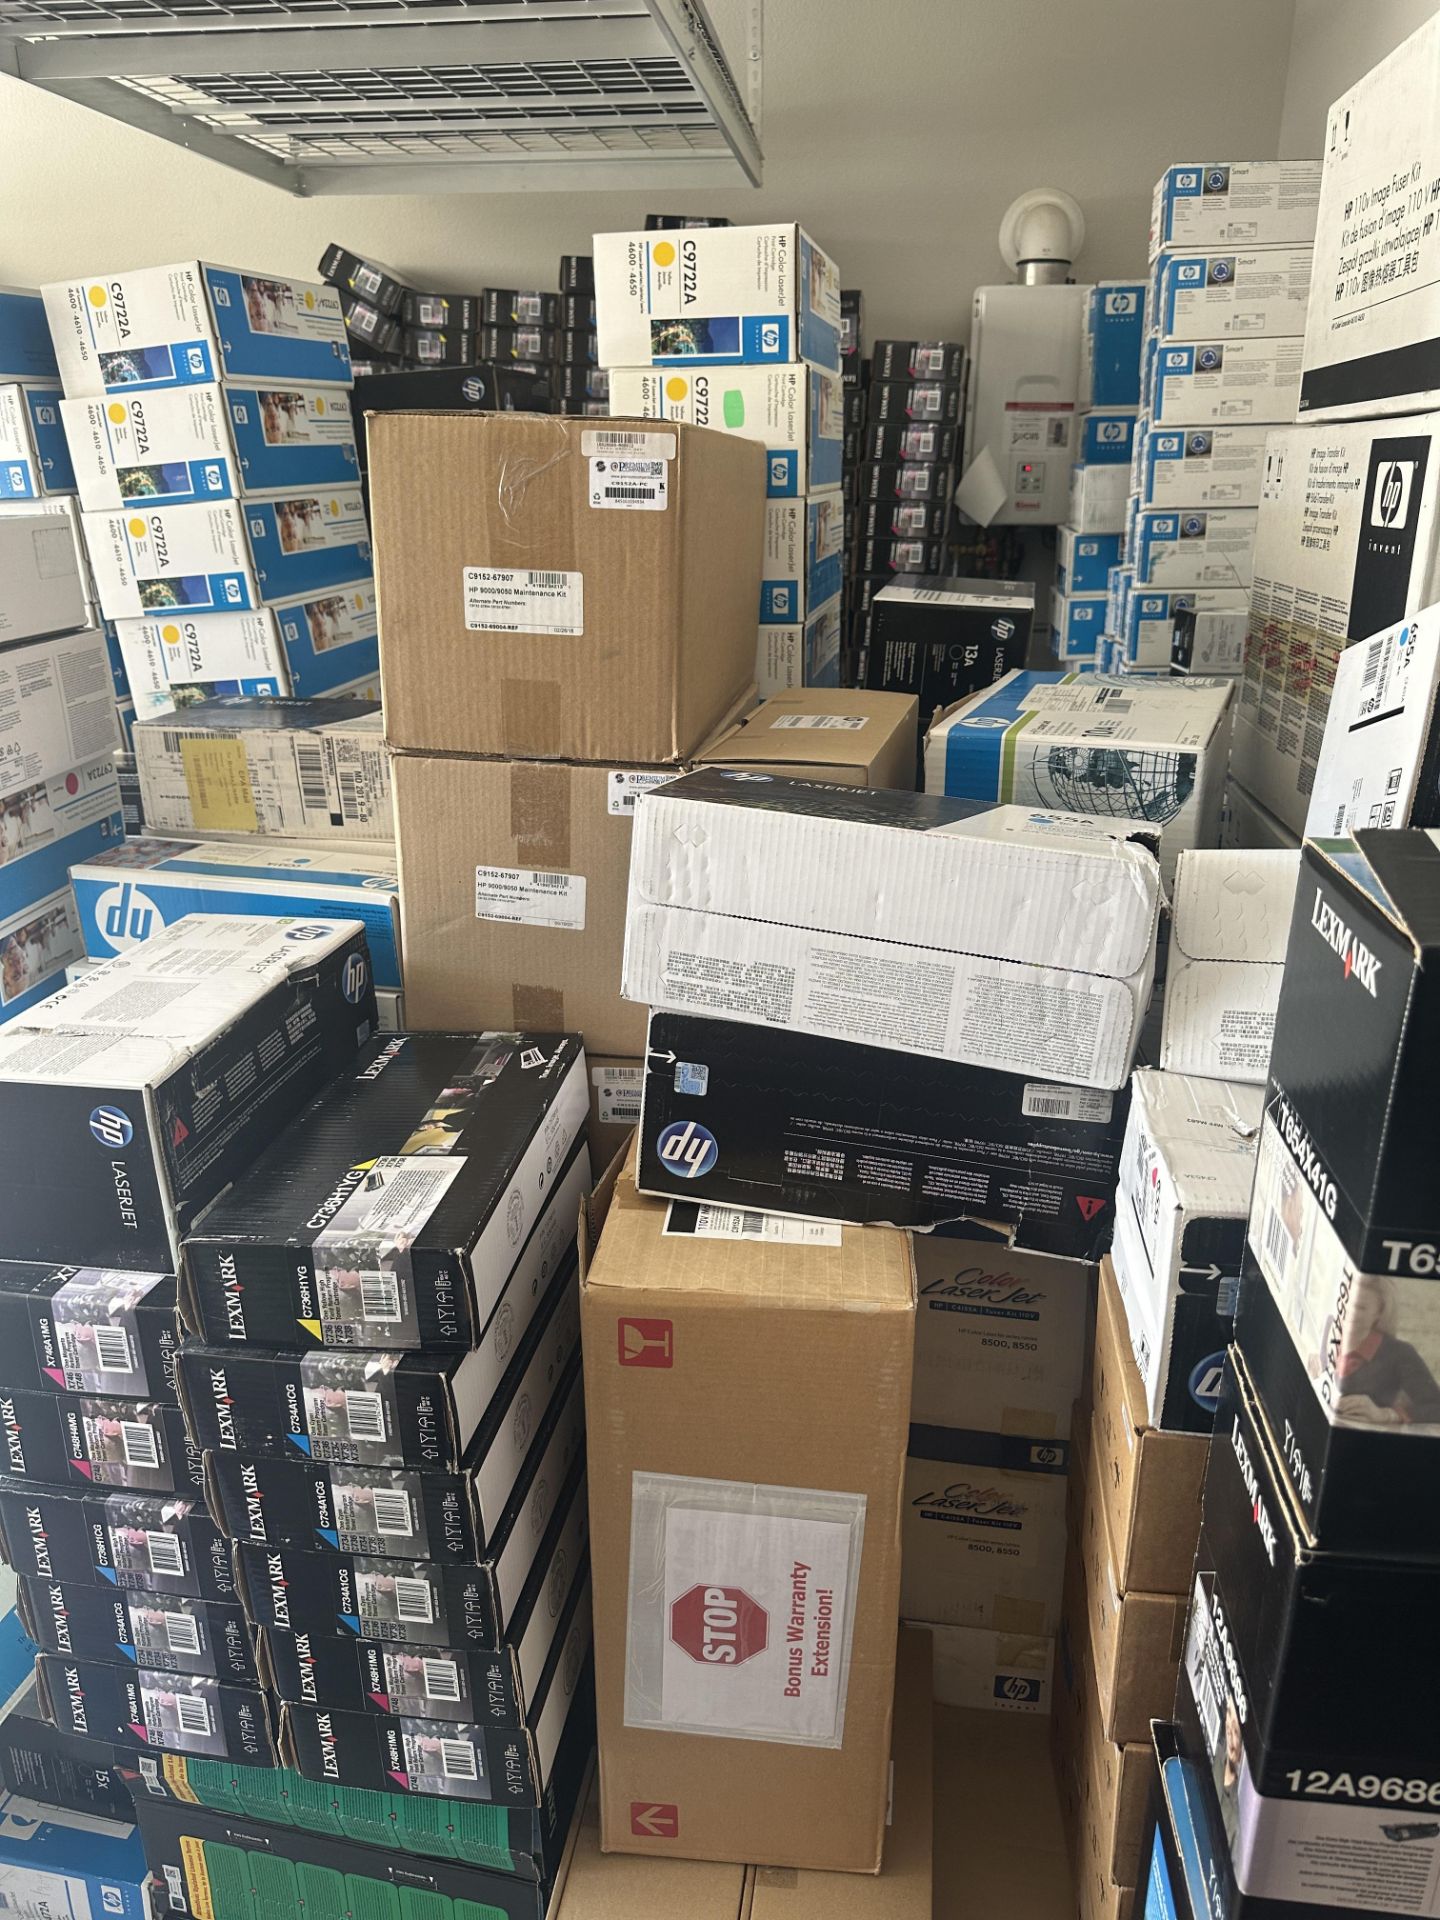 APPROX. 15 PALLETS OF TONER , XEROX, HP, LEXMARK + MANY MORE - Image 9 of 9